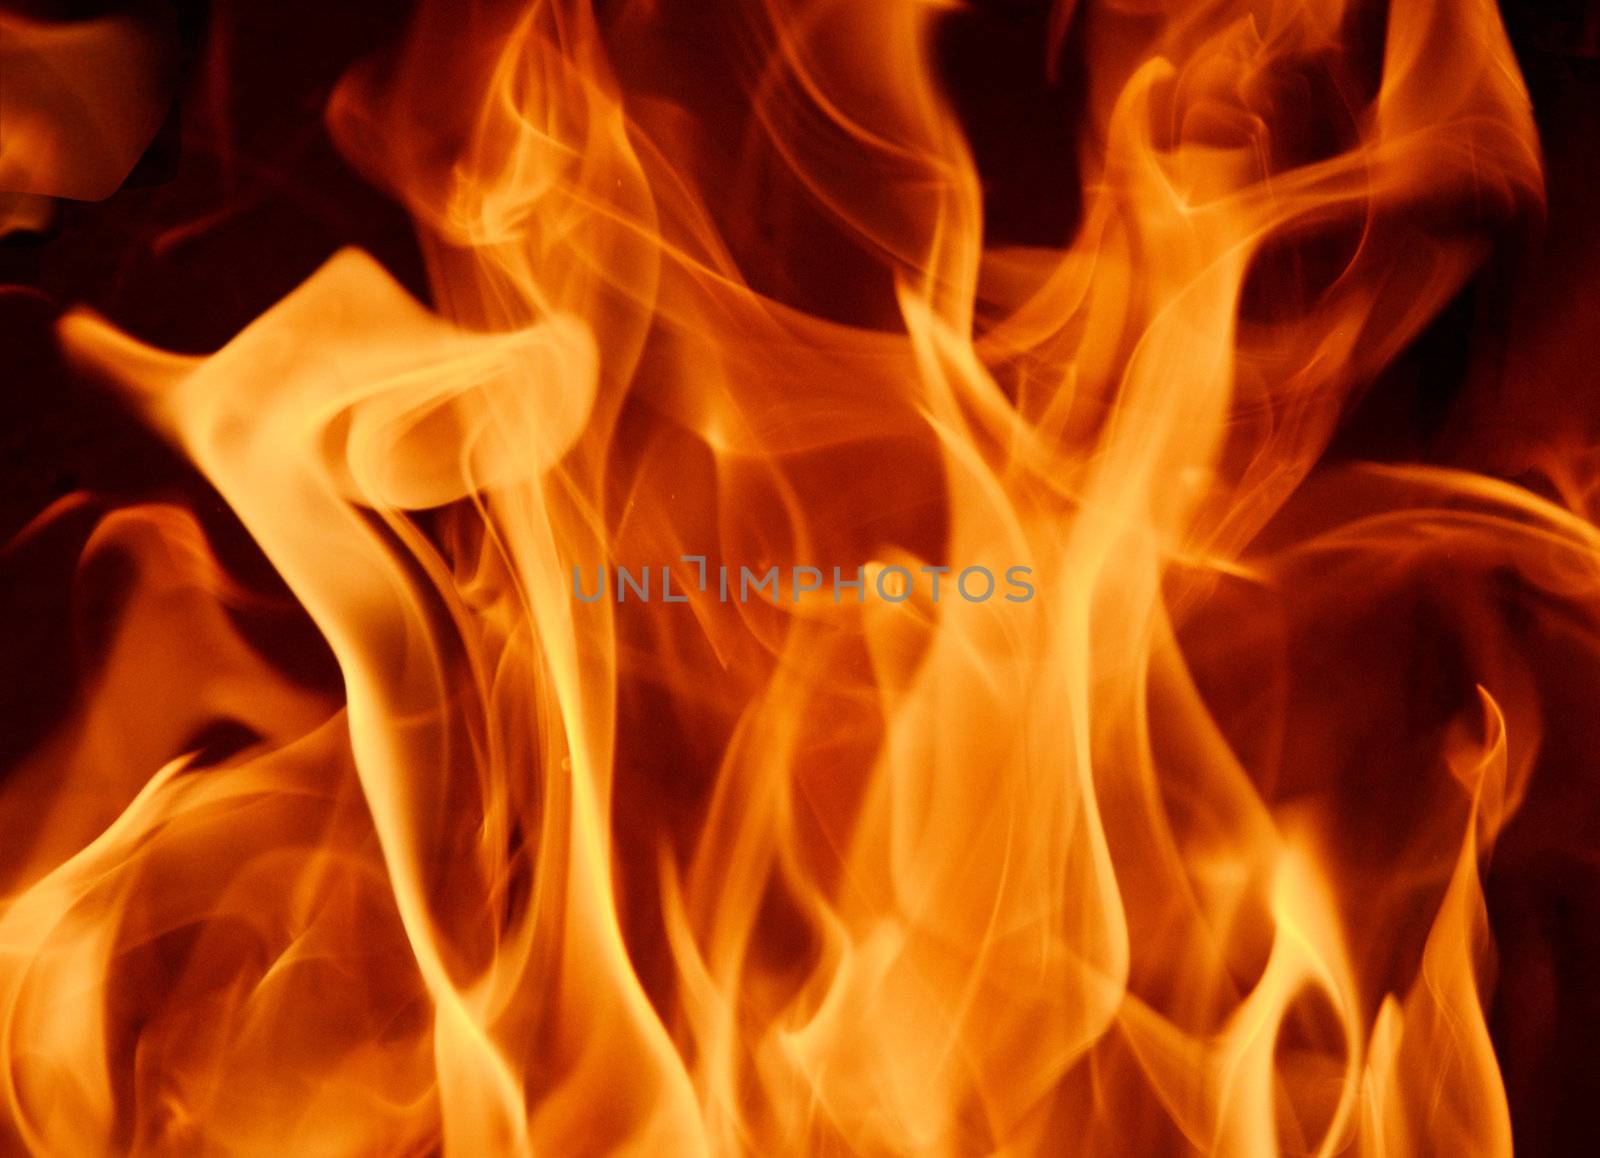 Abstract background / backdrop representing fire. flame pattern with dark and light spots. Can be used as a wallpaper